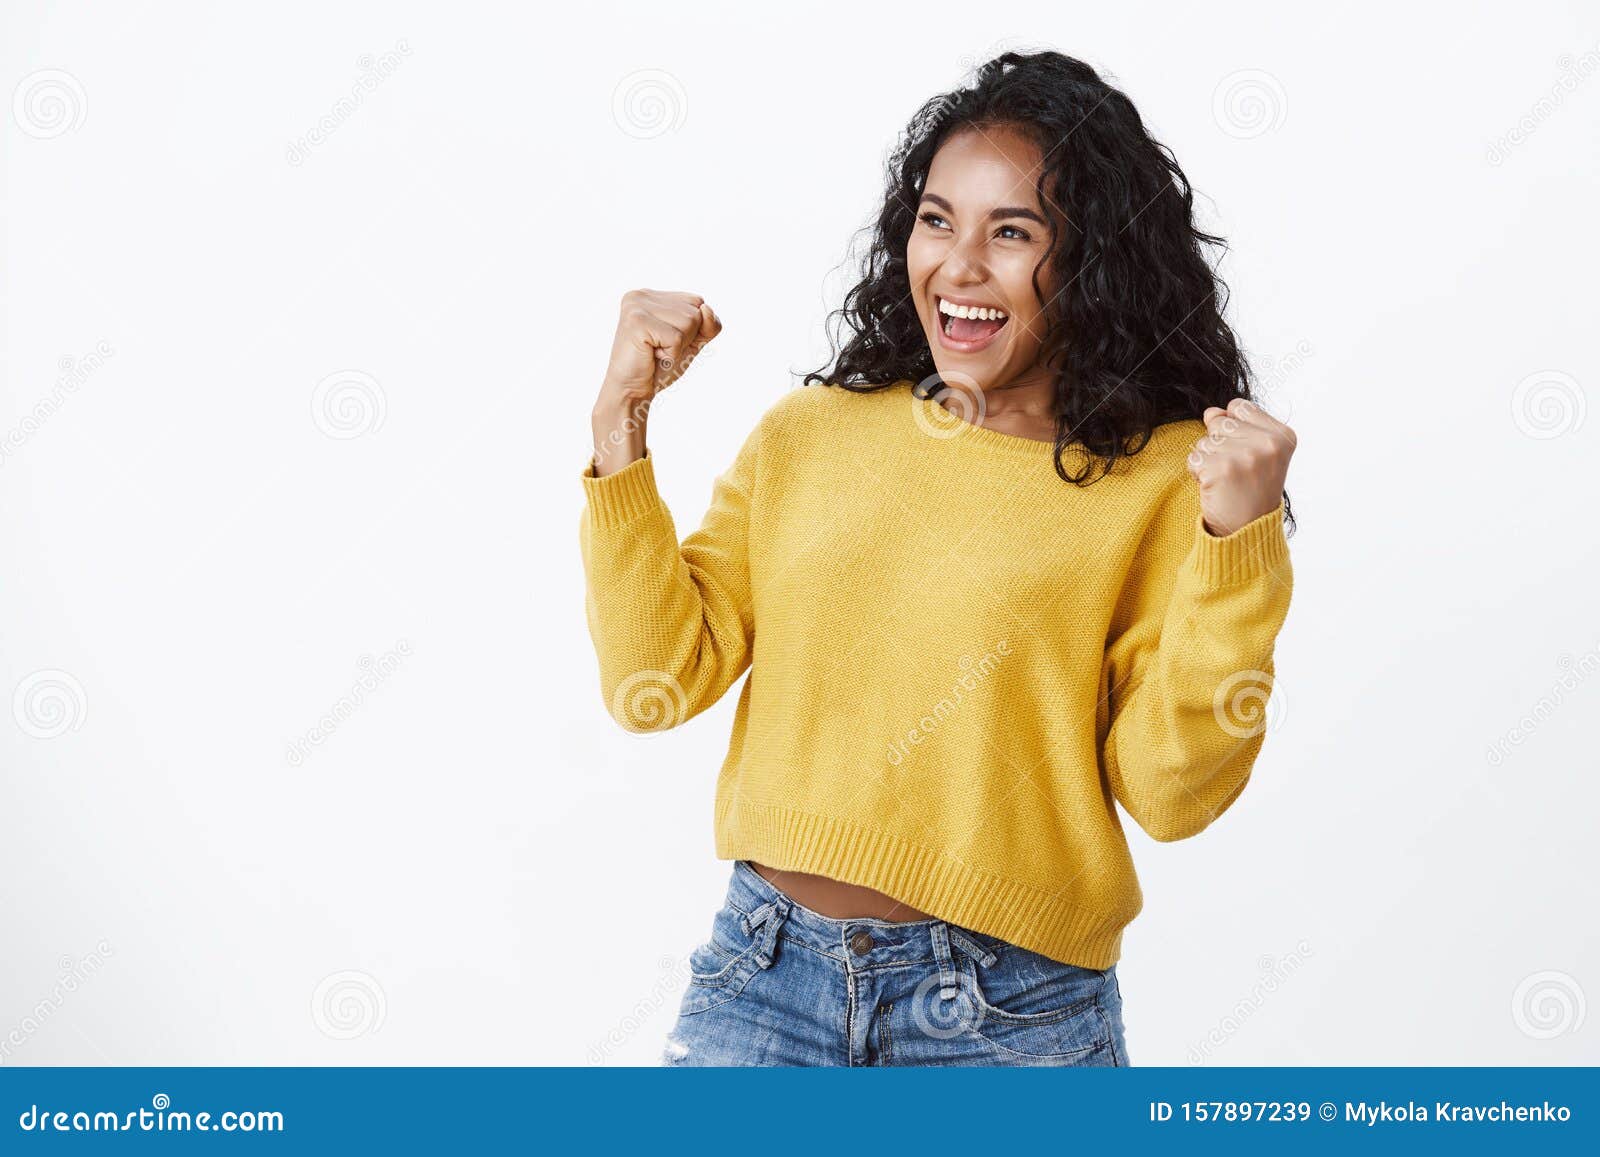 lucky venturous young african-american girl fan in yellow sweater, making fist pump gesture as smiling and looking left